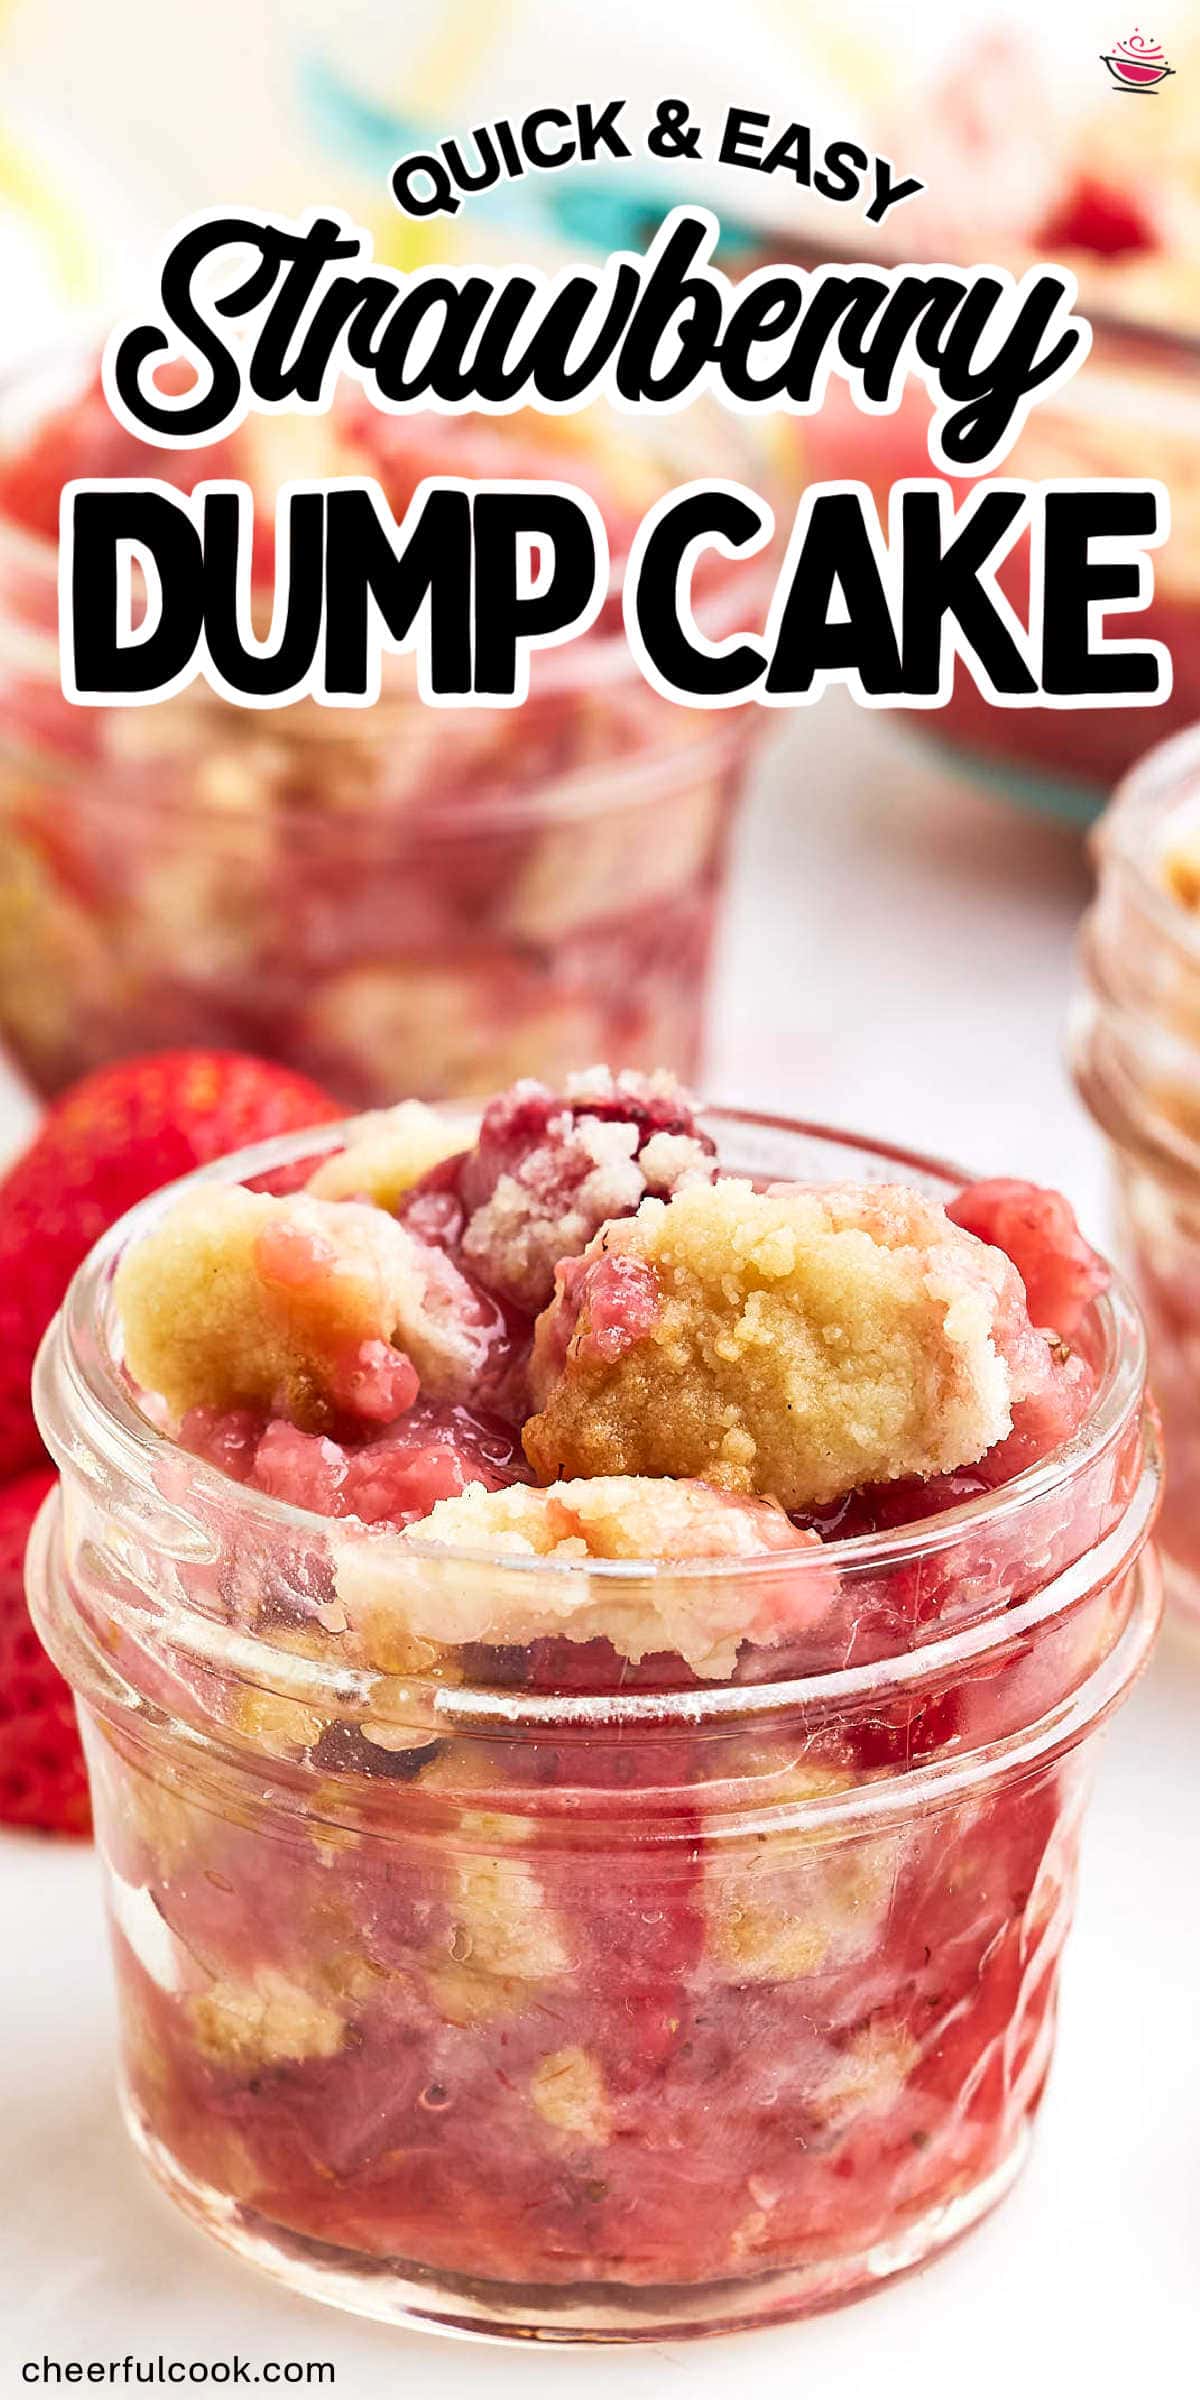 Get ready for a super easy and super delicious dessert! This Strawberry Dump Cake is the perfect treat for any occasion. All you need is strawberries, sugar, cake mix, and butter. Layer it up, bake it, and enjoy the sweet, fruity goodness! This recipe is a guaranteed crowd-pleaser. #cheerfulcook #strawberrydumpcake #dumpcakerecipe #dessert #strawberries #4ingredients via @cheerfulcook